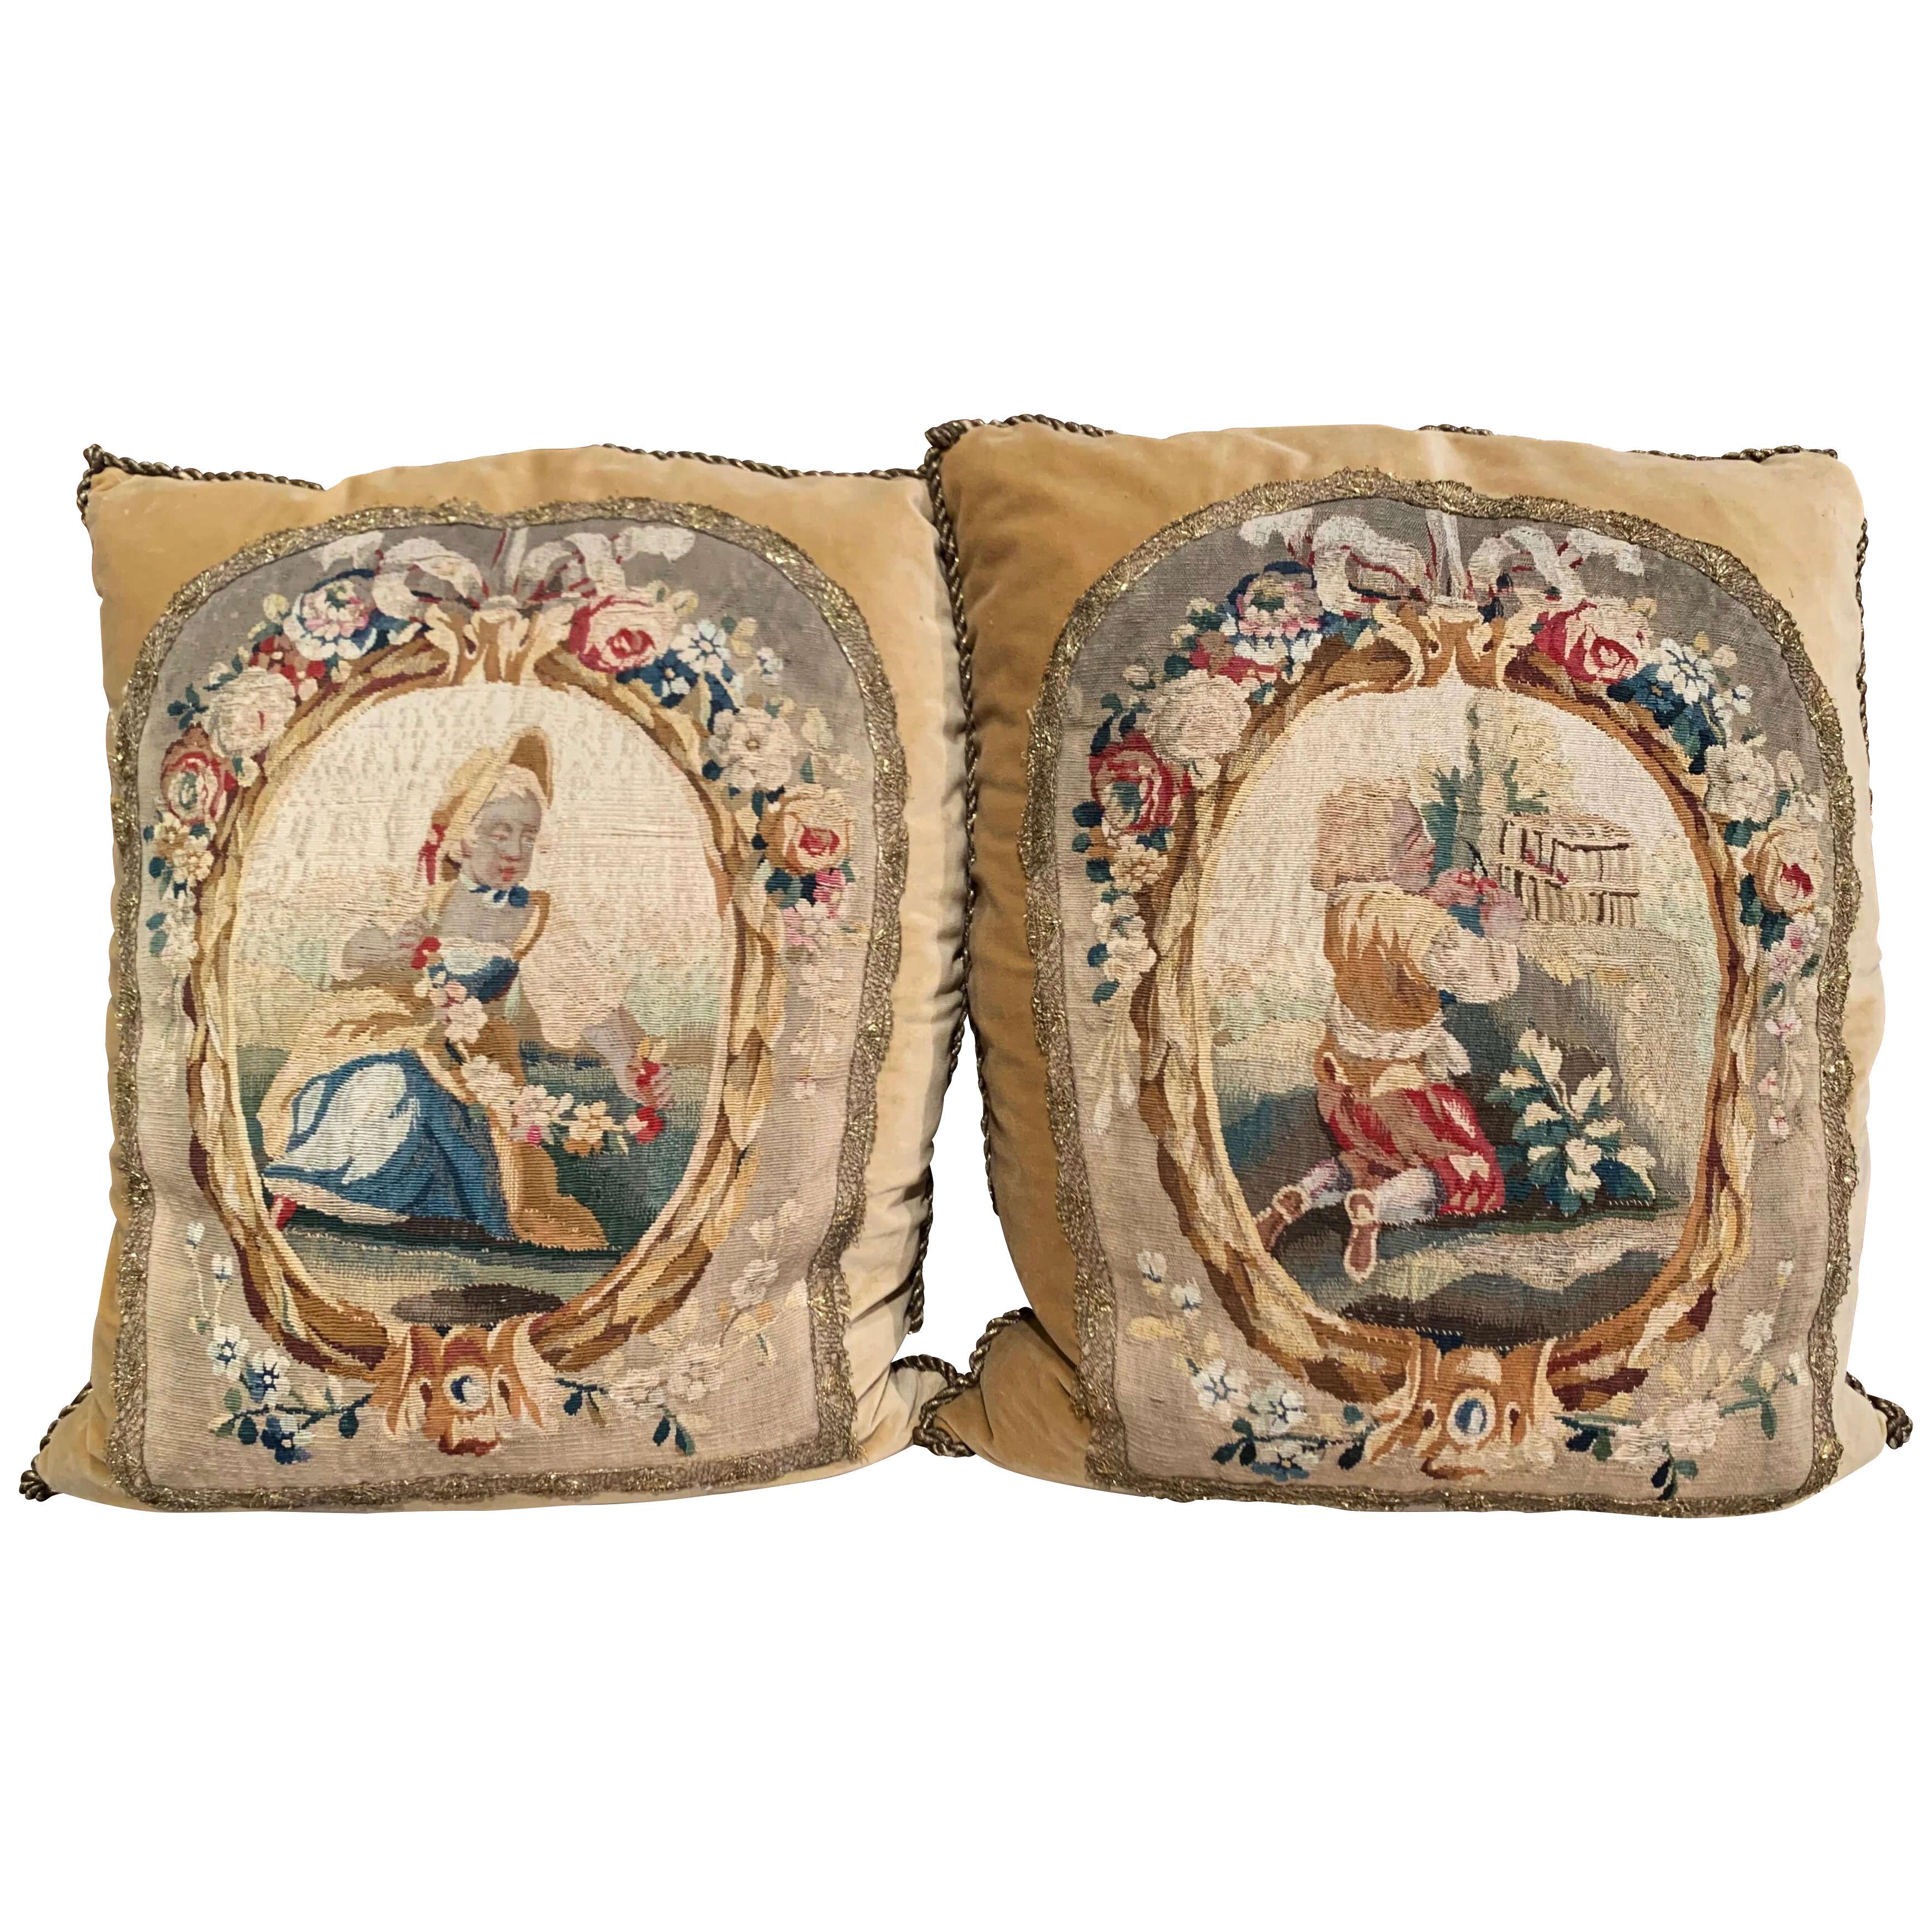 Pair of Down Pillows Made with 18th Century Aubusson Tapestry, Trim and Velvet